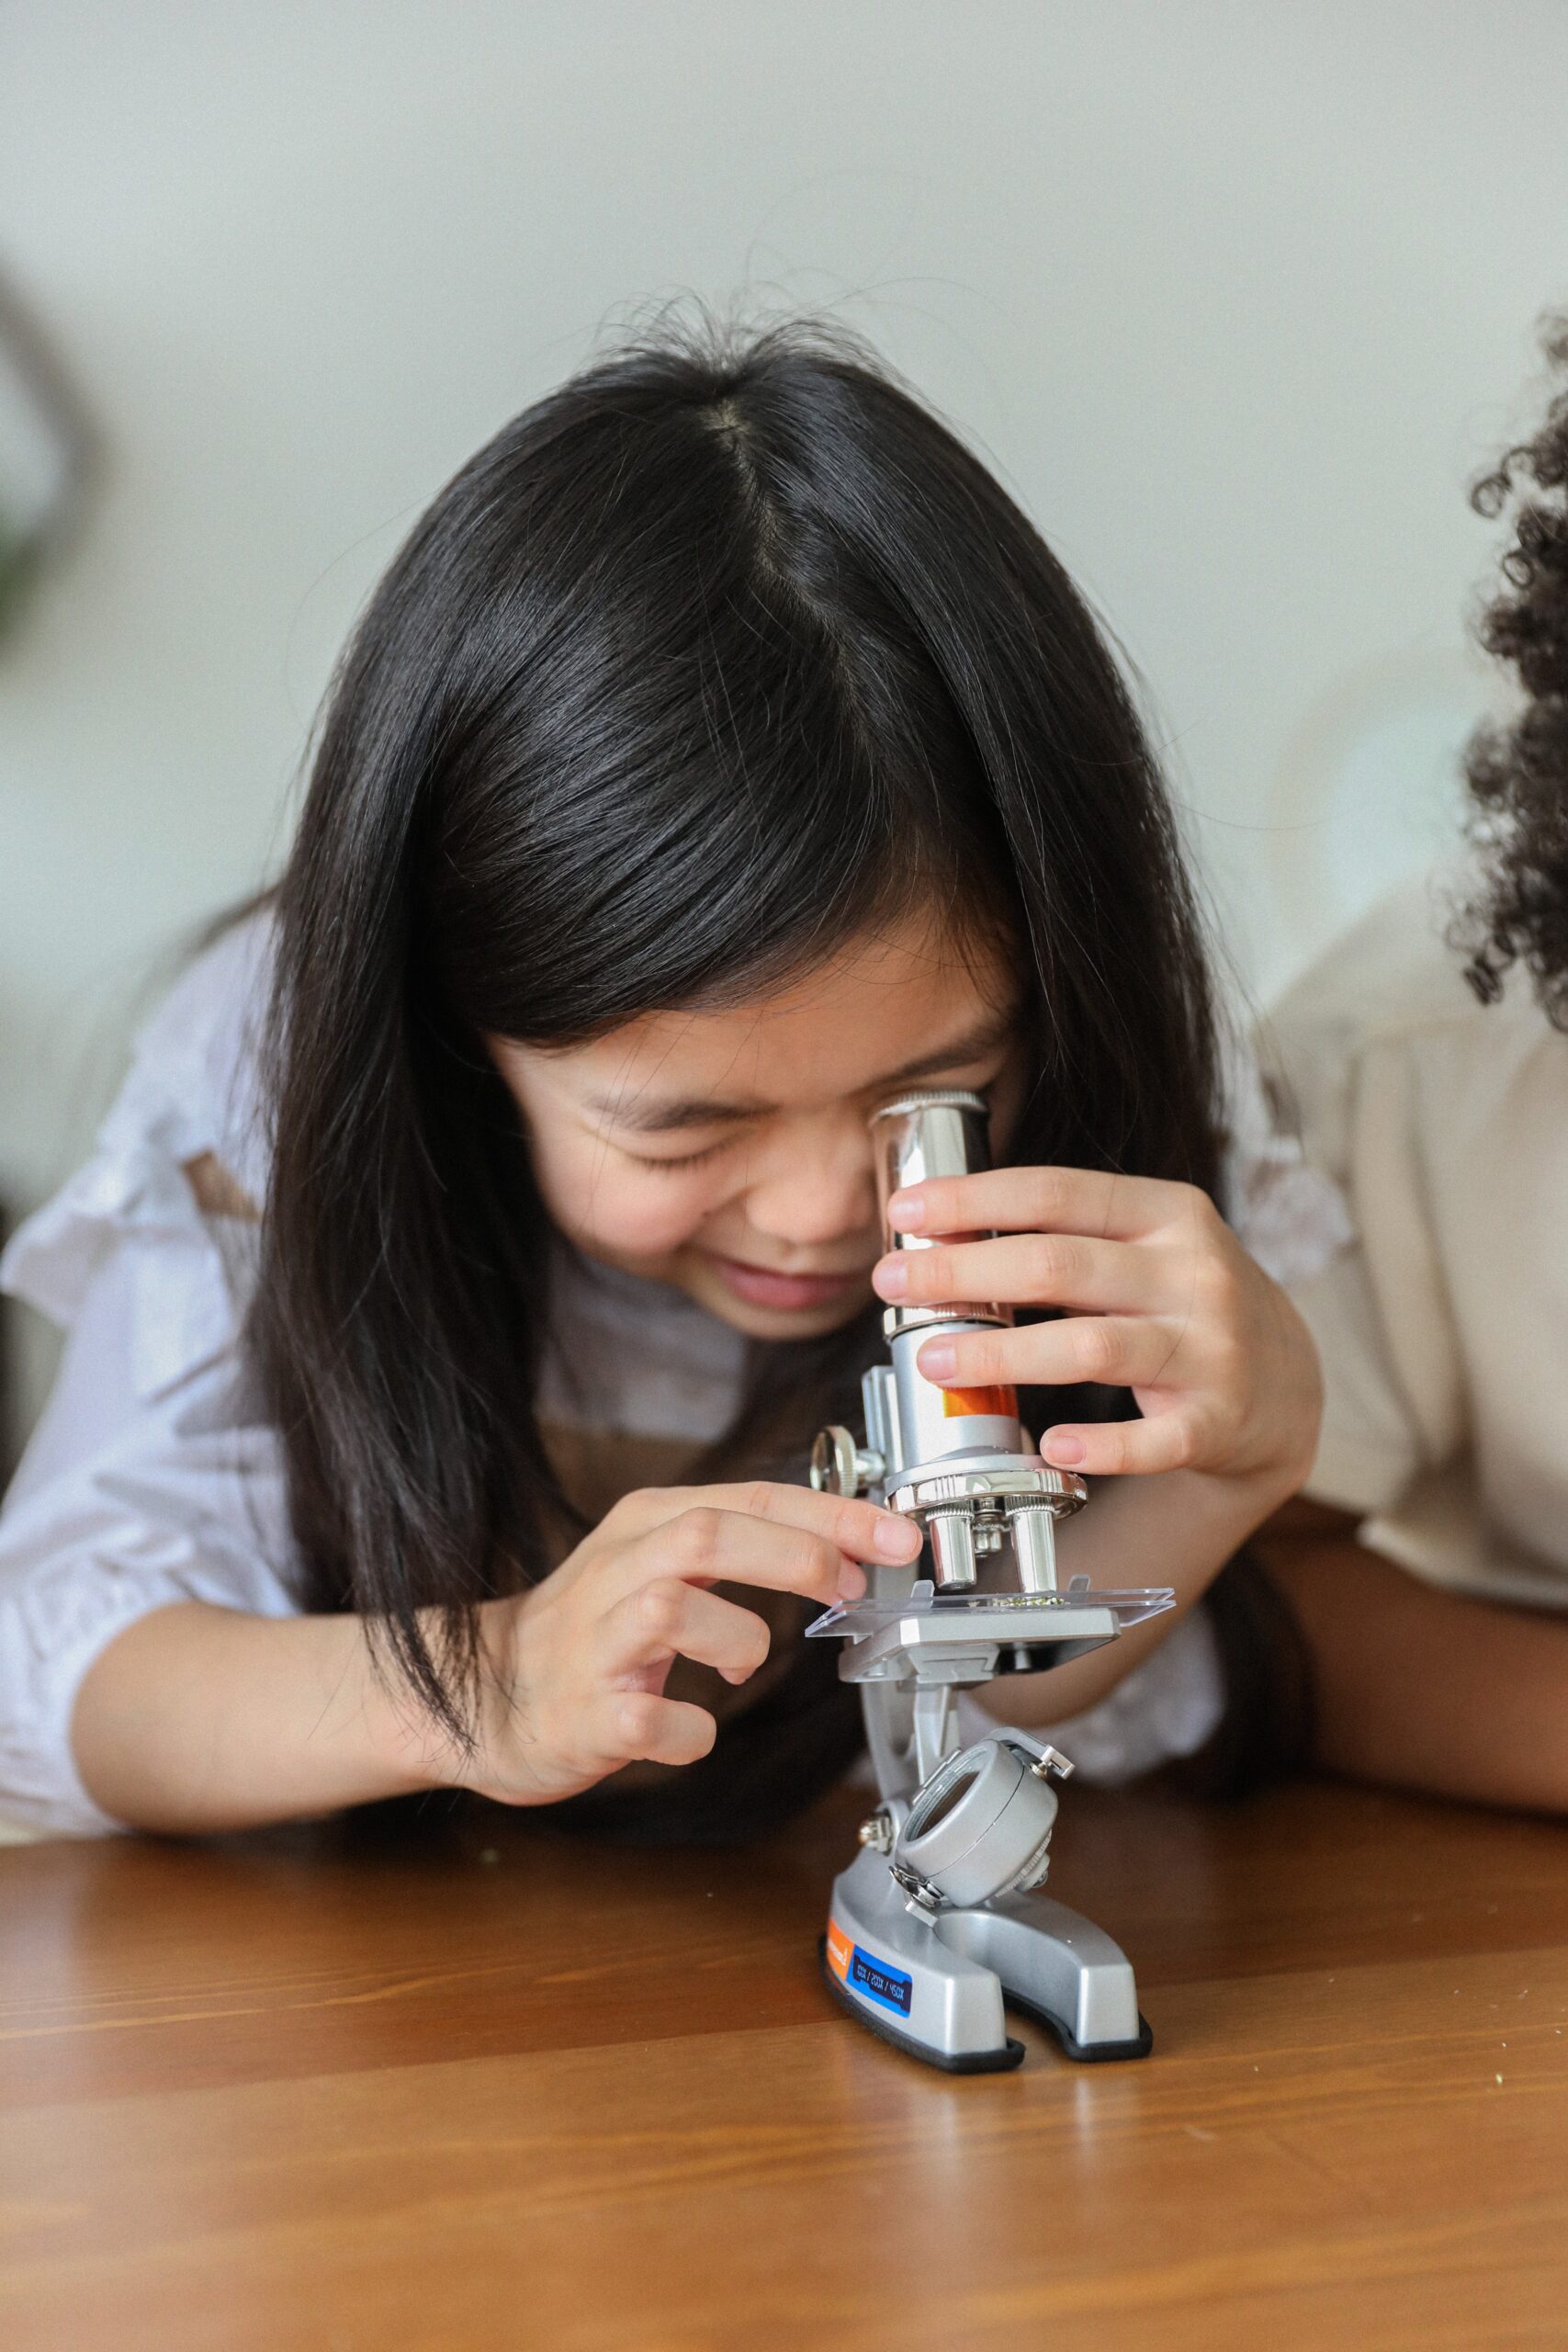 A young girl with black hair is featured looking through a small microscope.